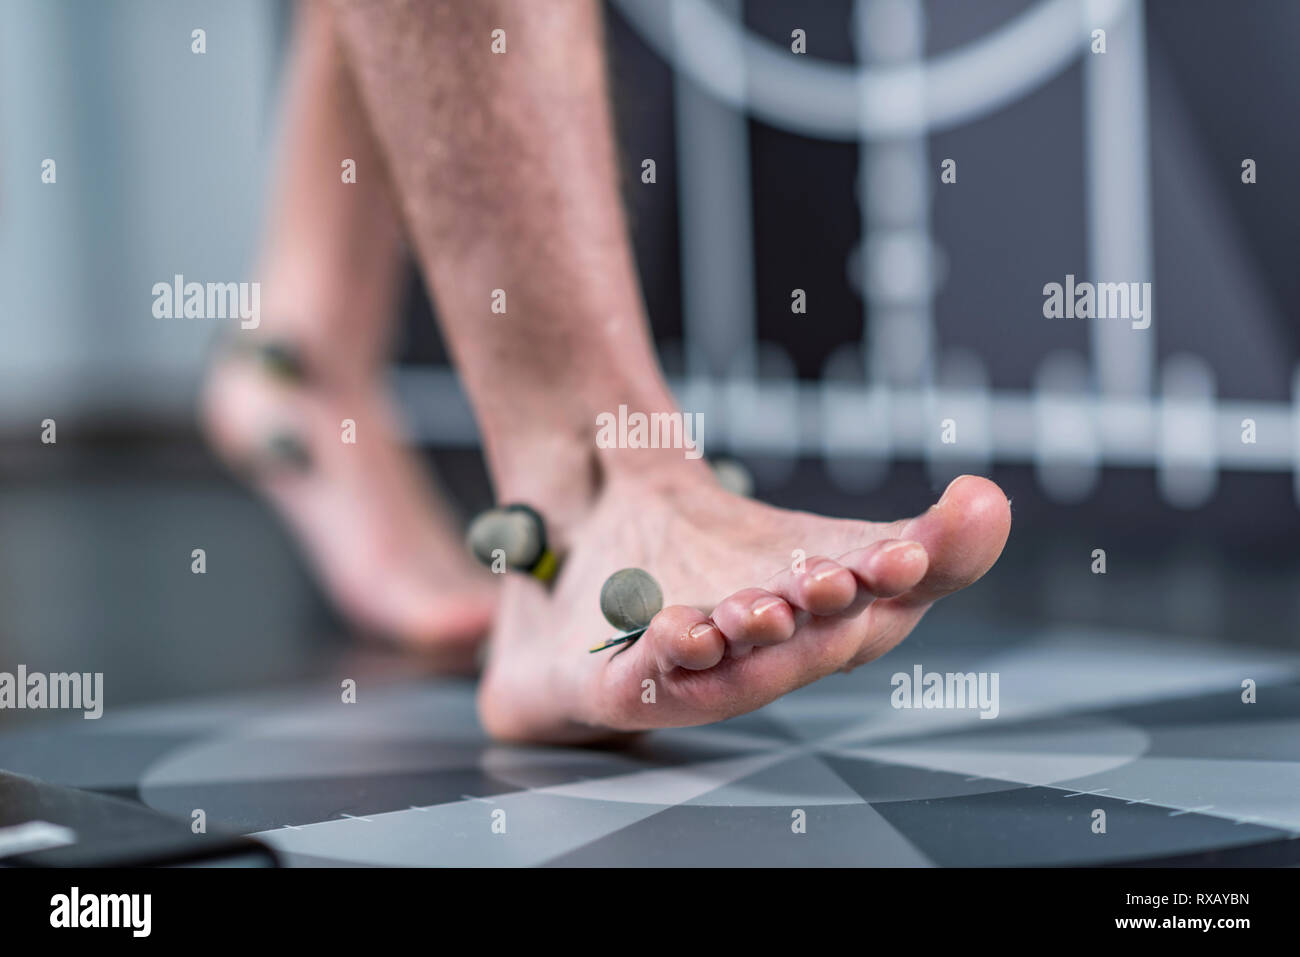 Markers for gait analysis Stock Photo